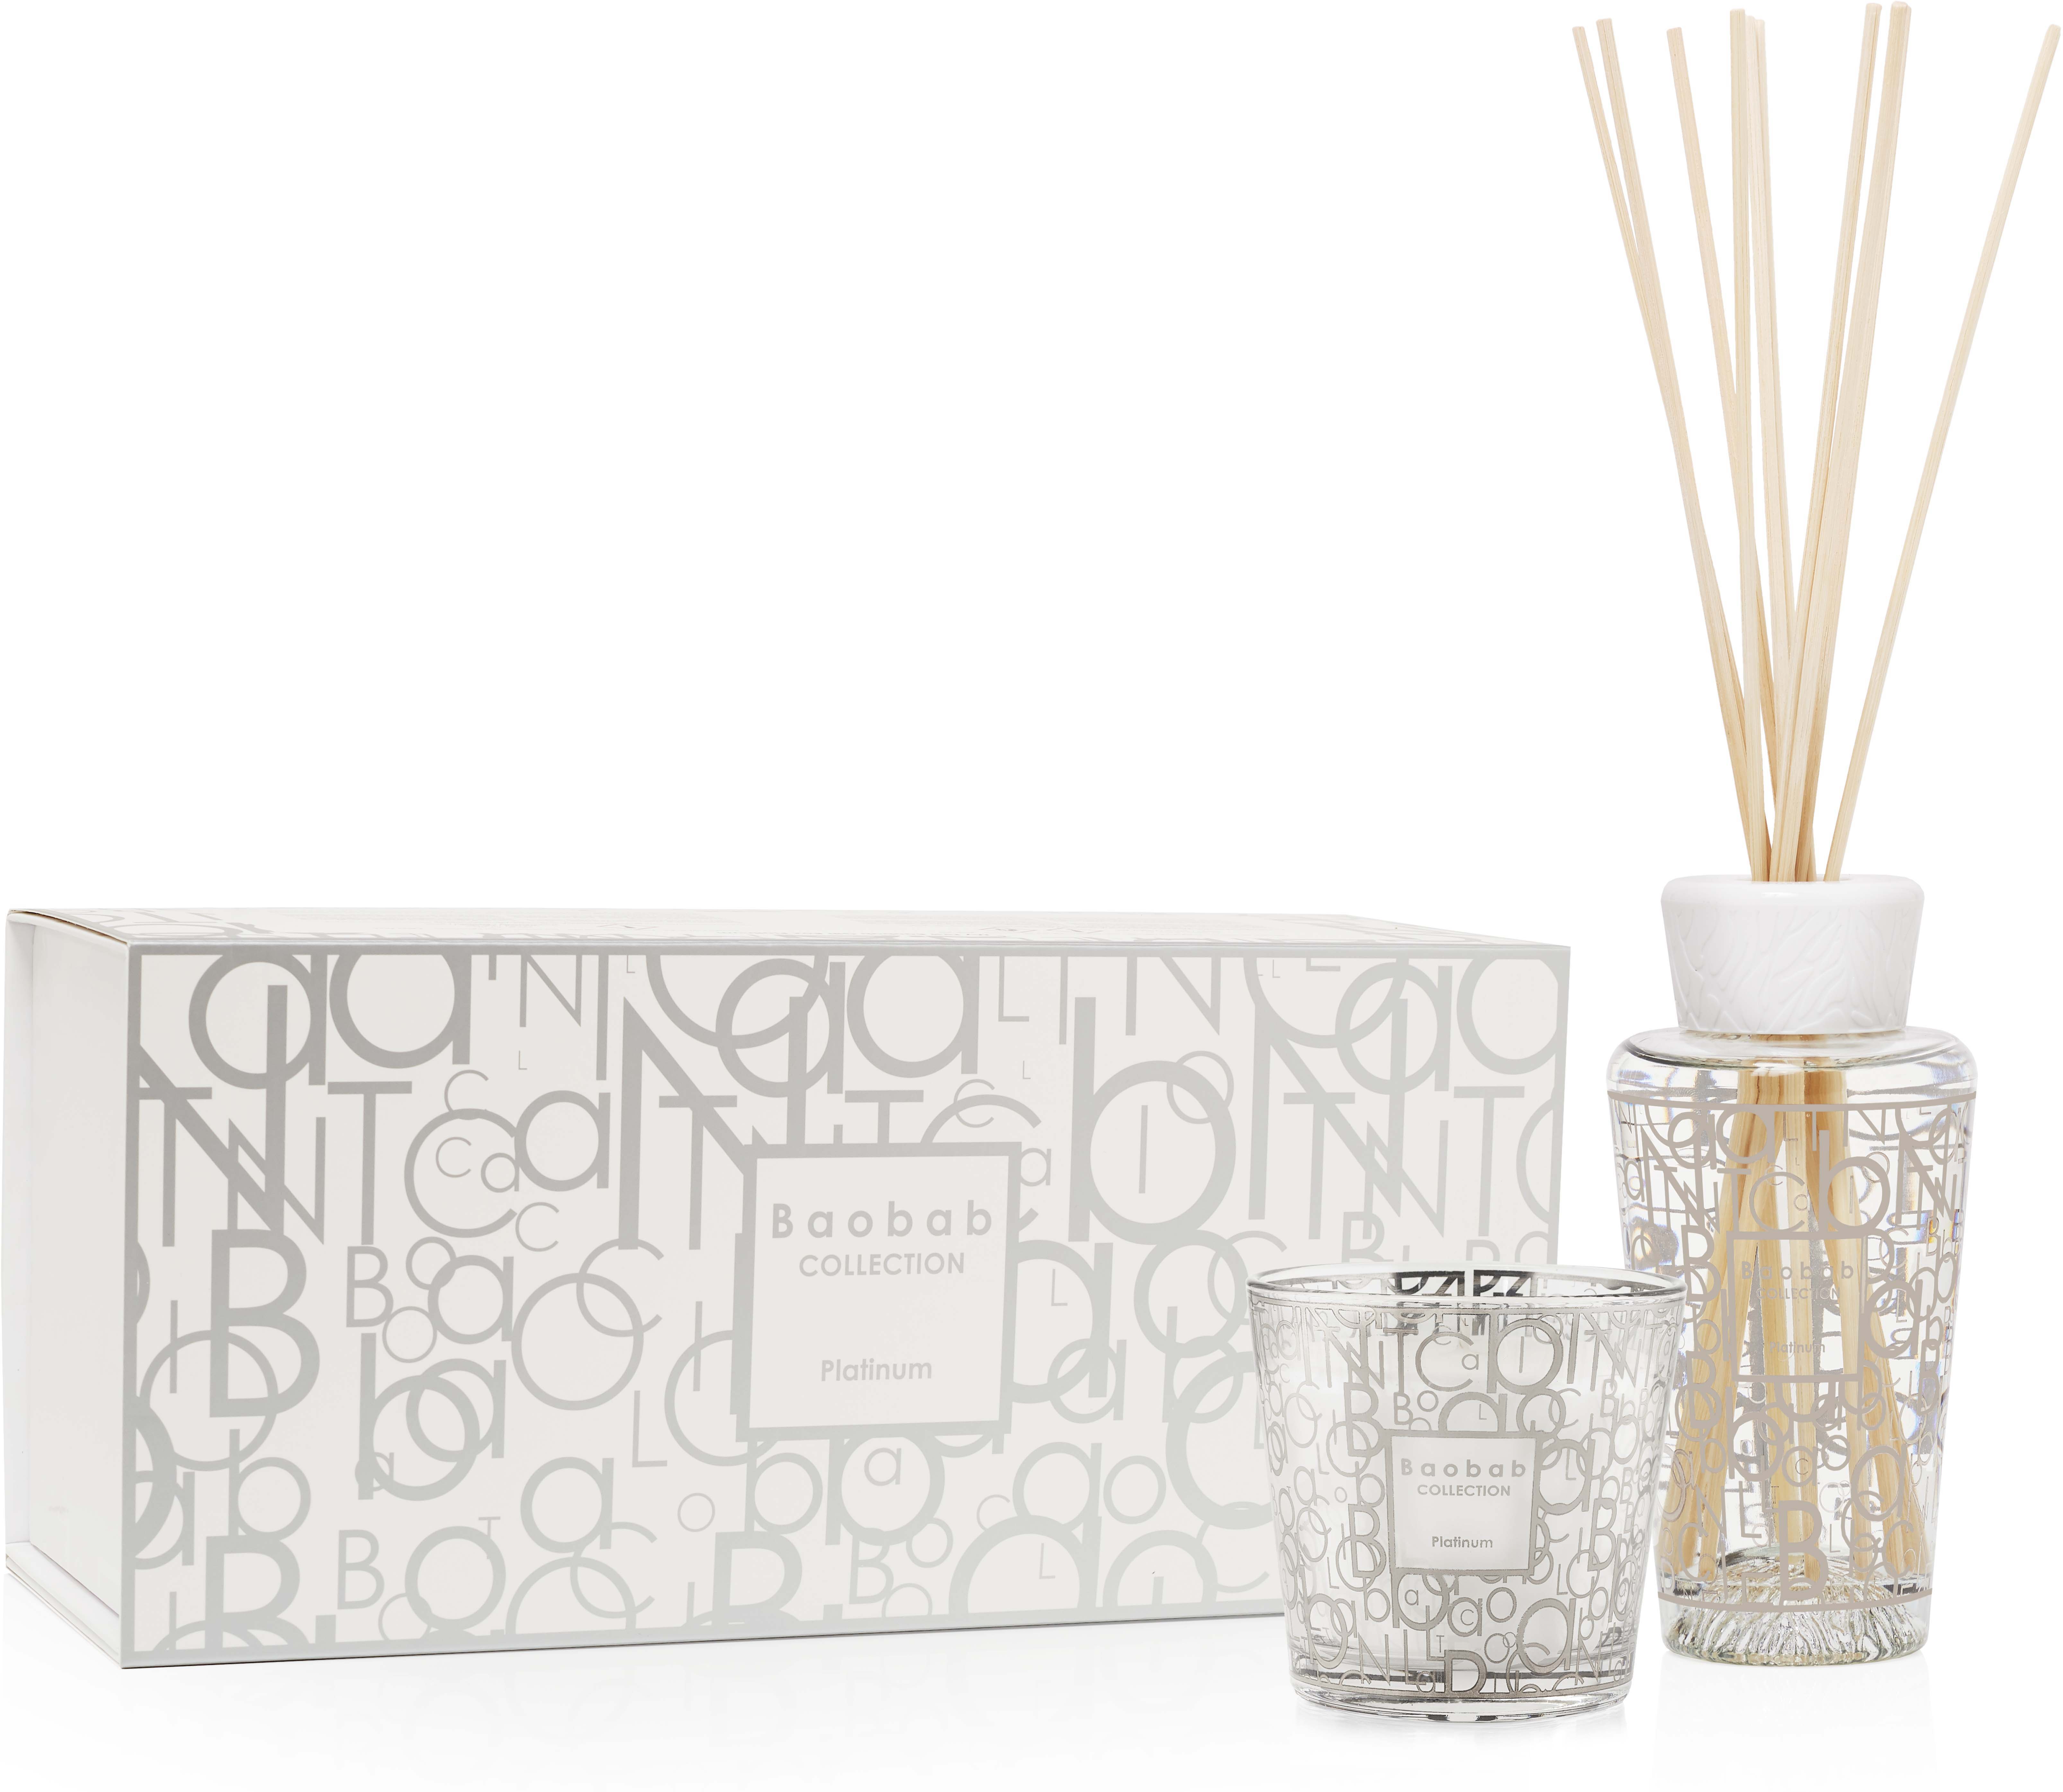 Baobab Collection Platinum Gift Box Fragranced Candle + Diffuser